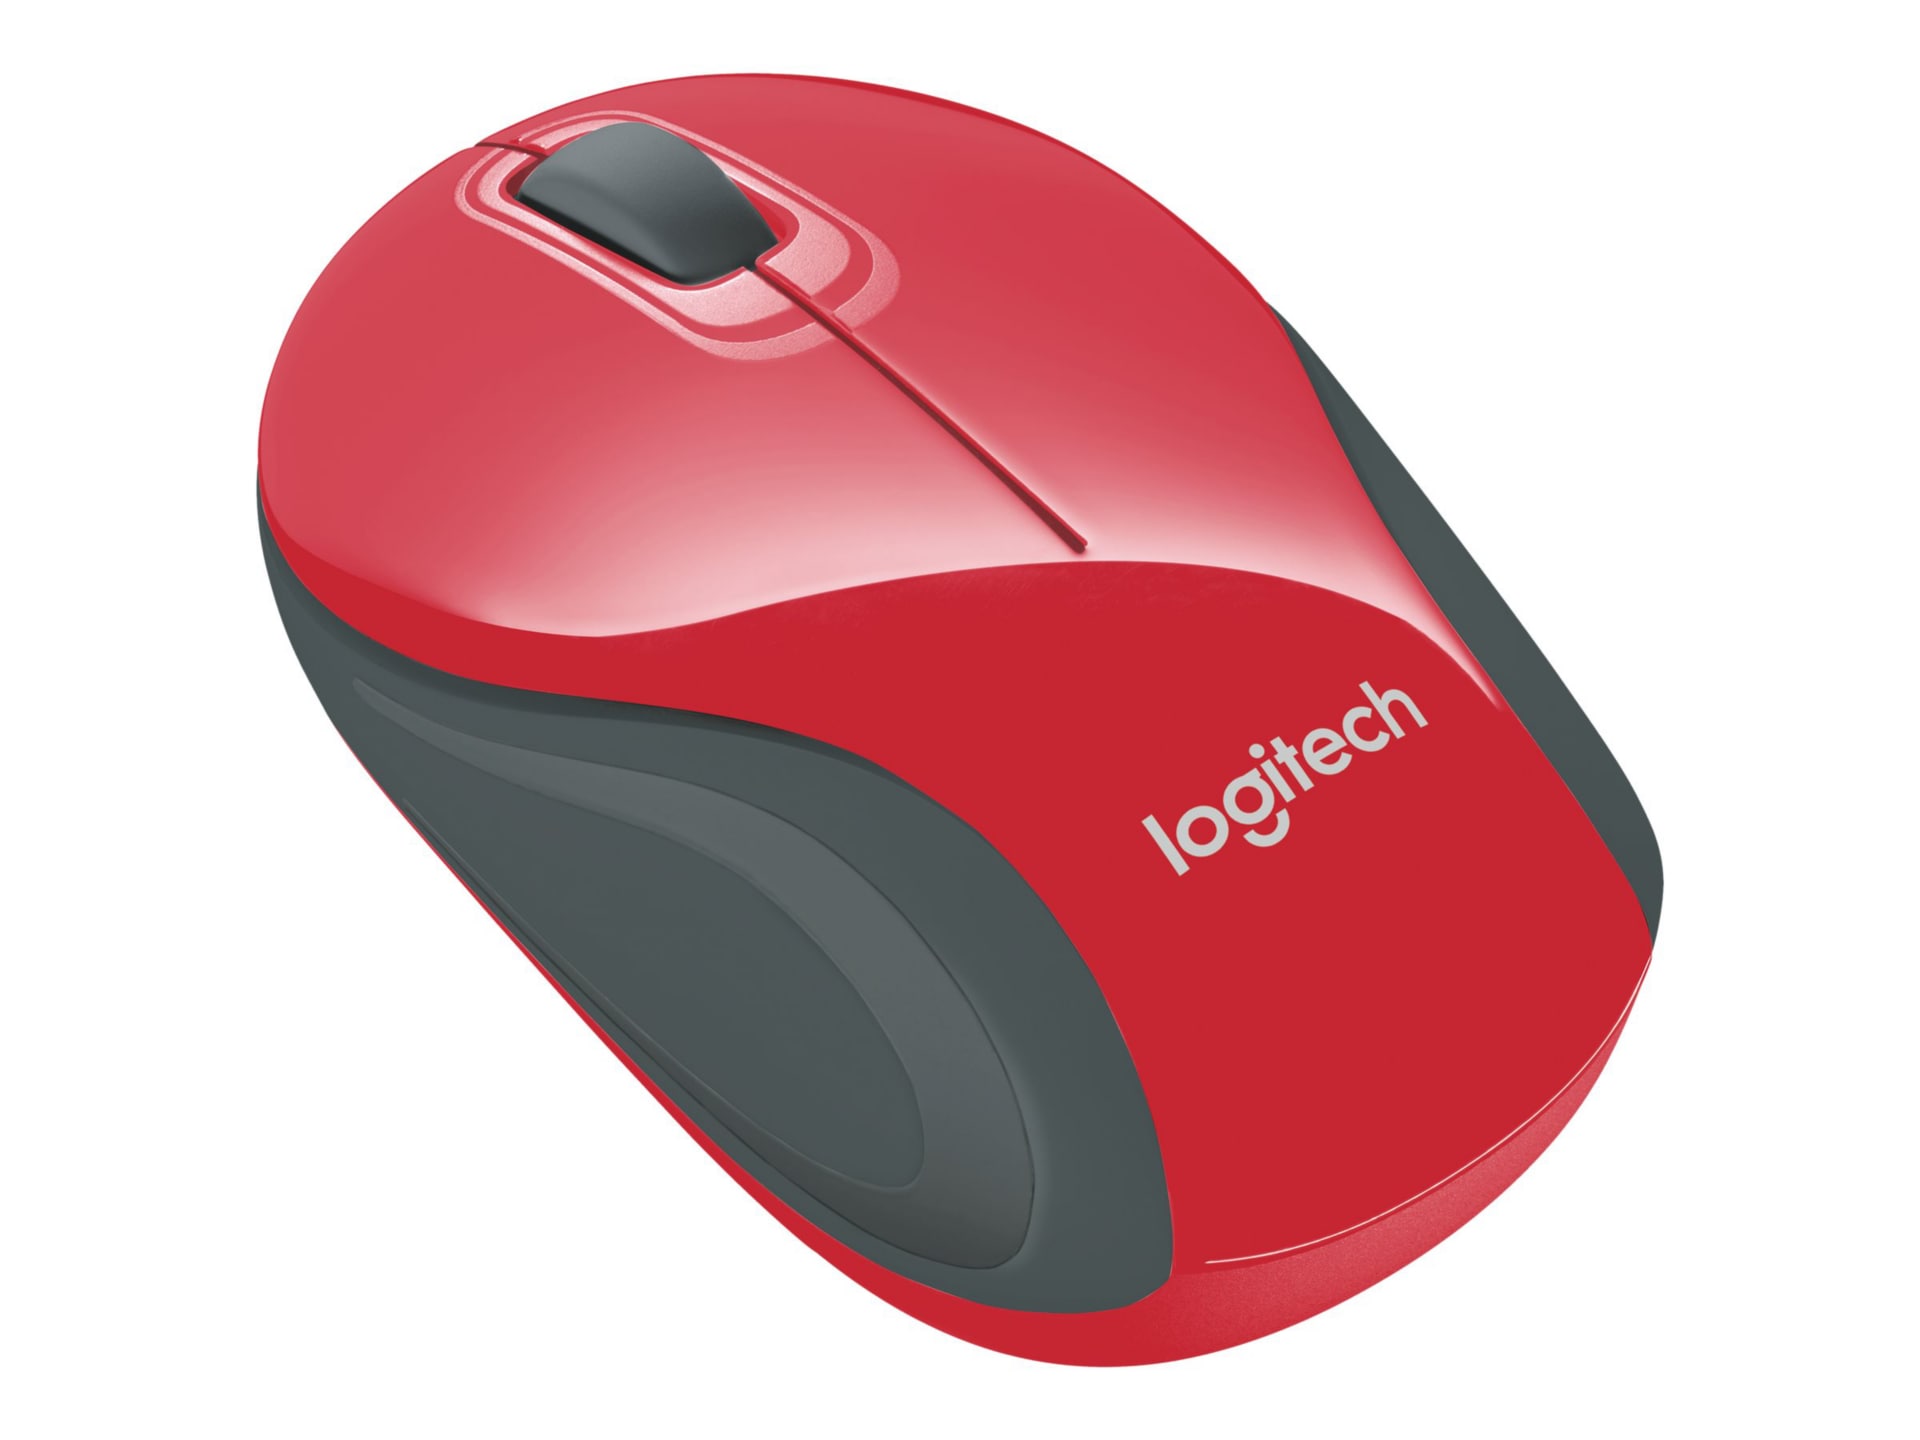 GHz 2.4 - - mouse M187 Logitech 910-002727 Mice - - - red